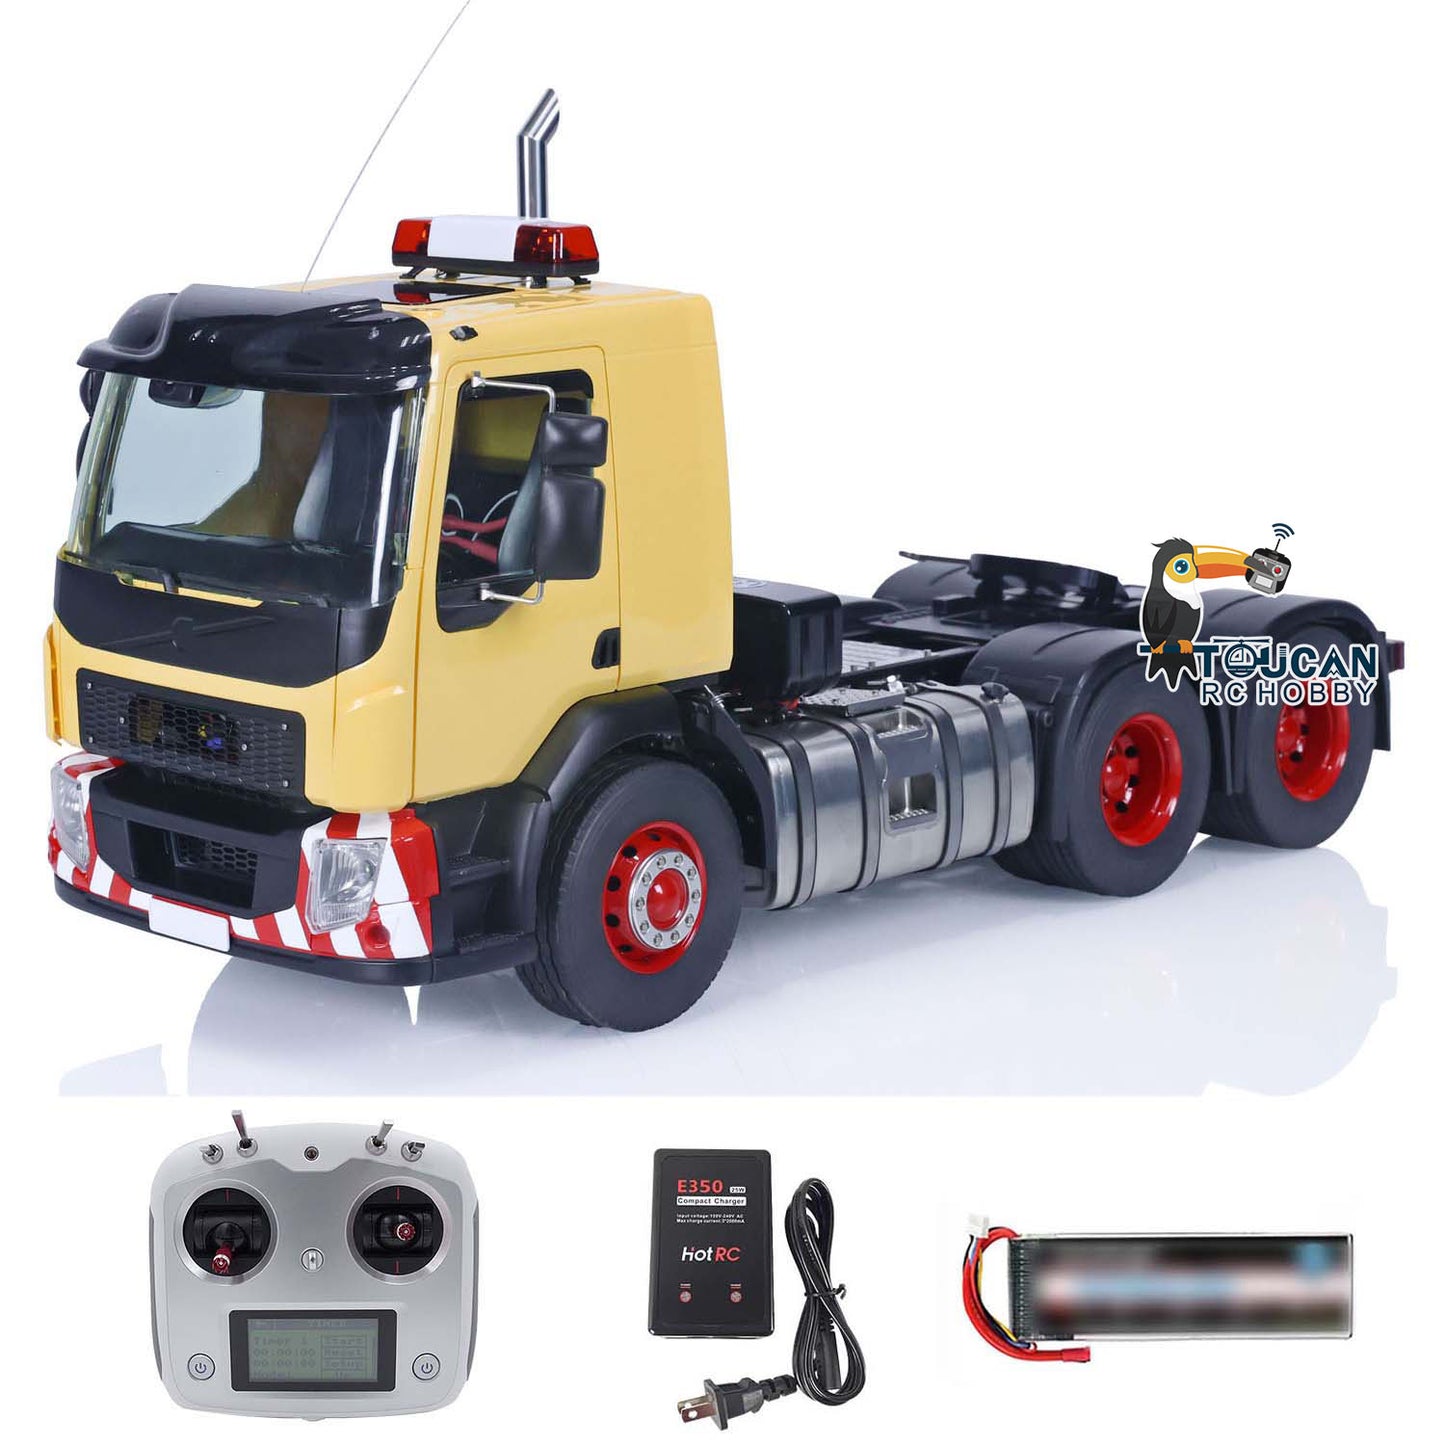 LESU 1/14 6x6 RC Tractor Truck 3 Axles Painted Assembled Remote Control Car Model DIY Emulated Vehicle Optional Versions